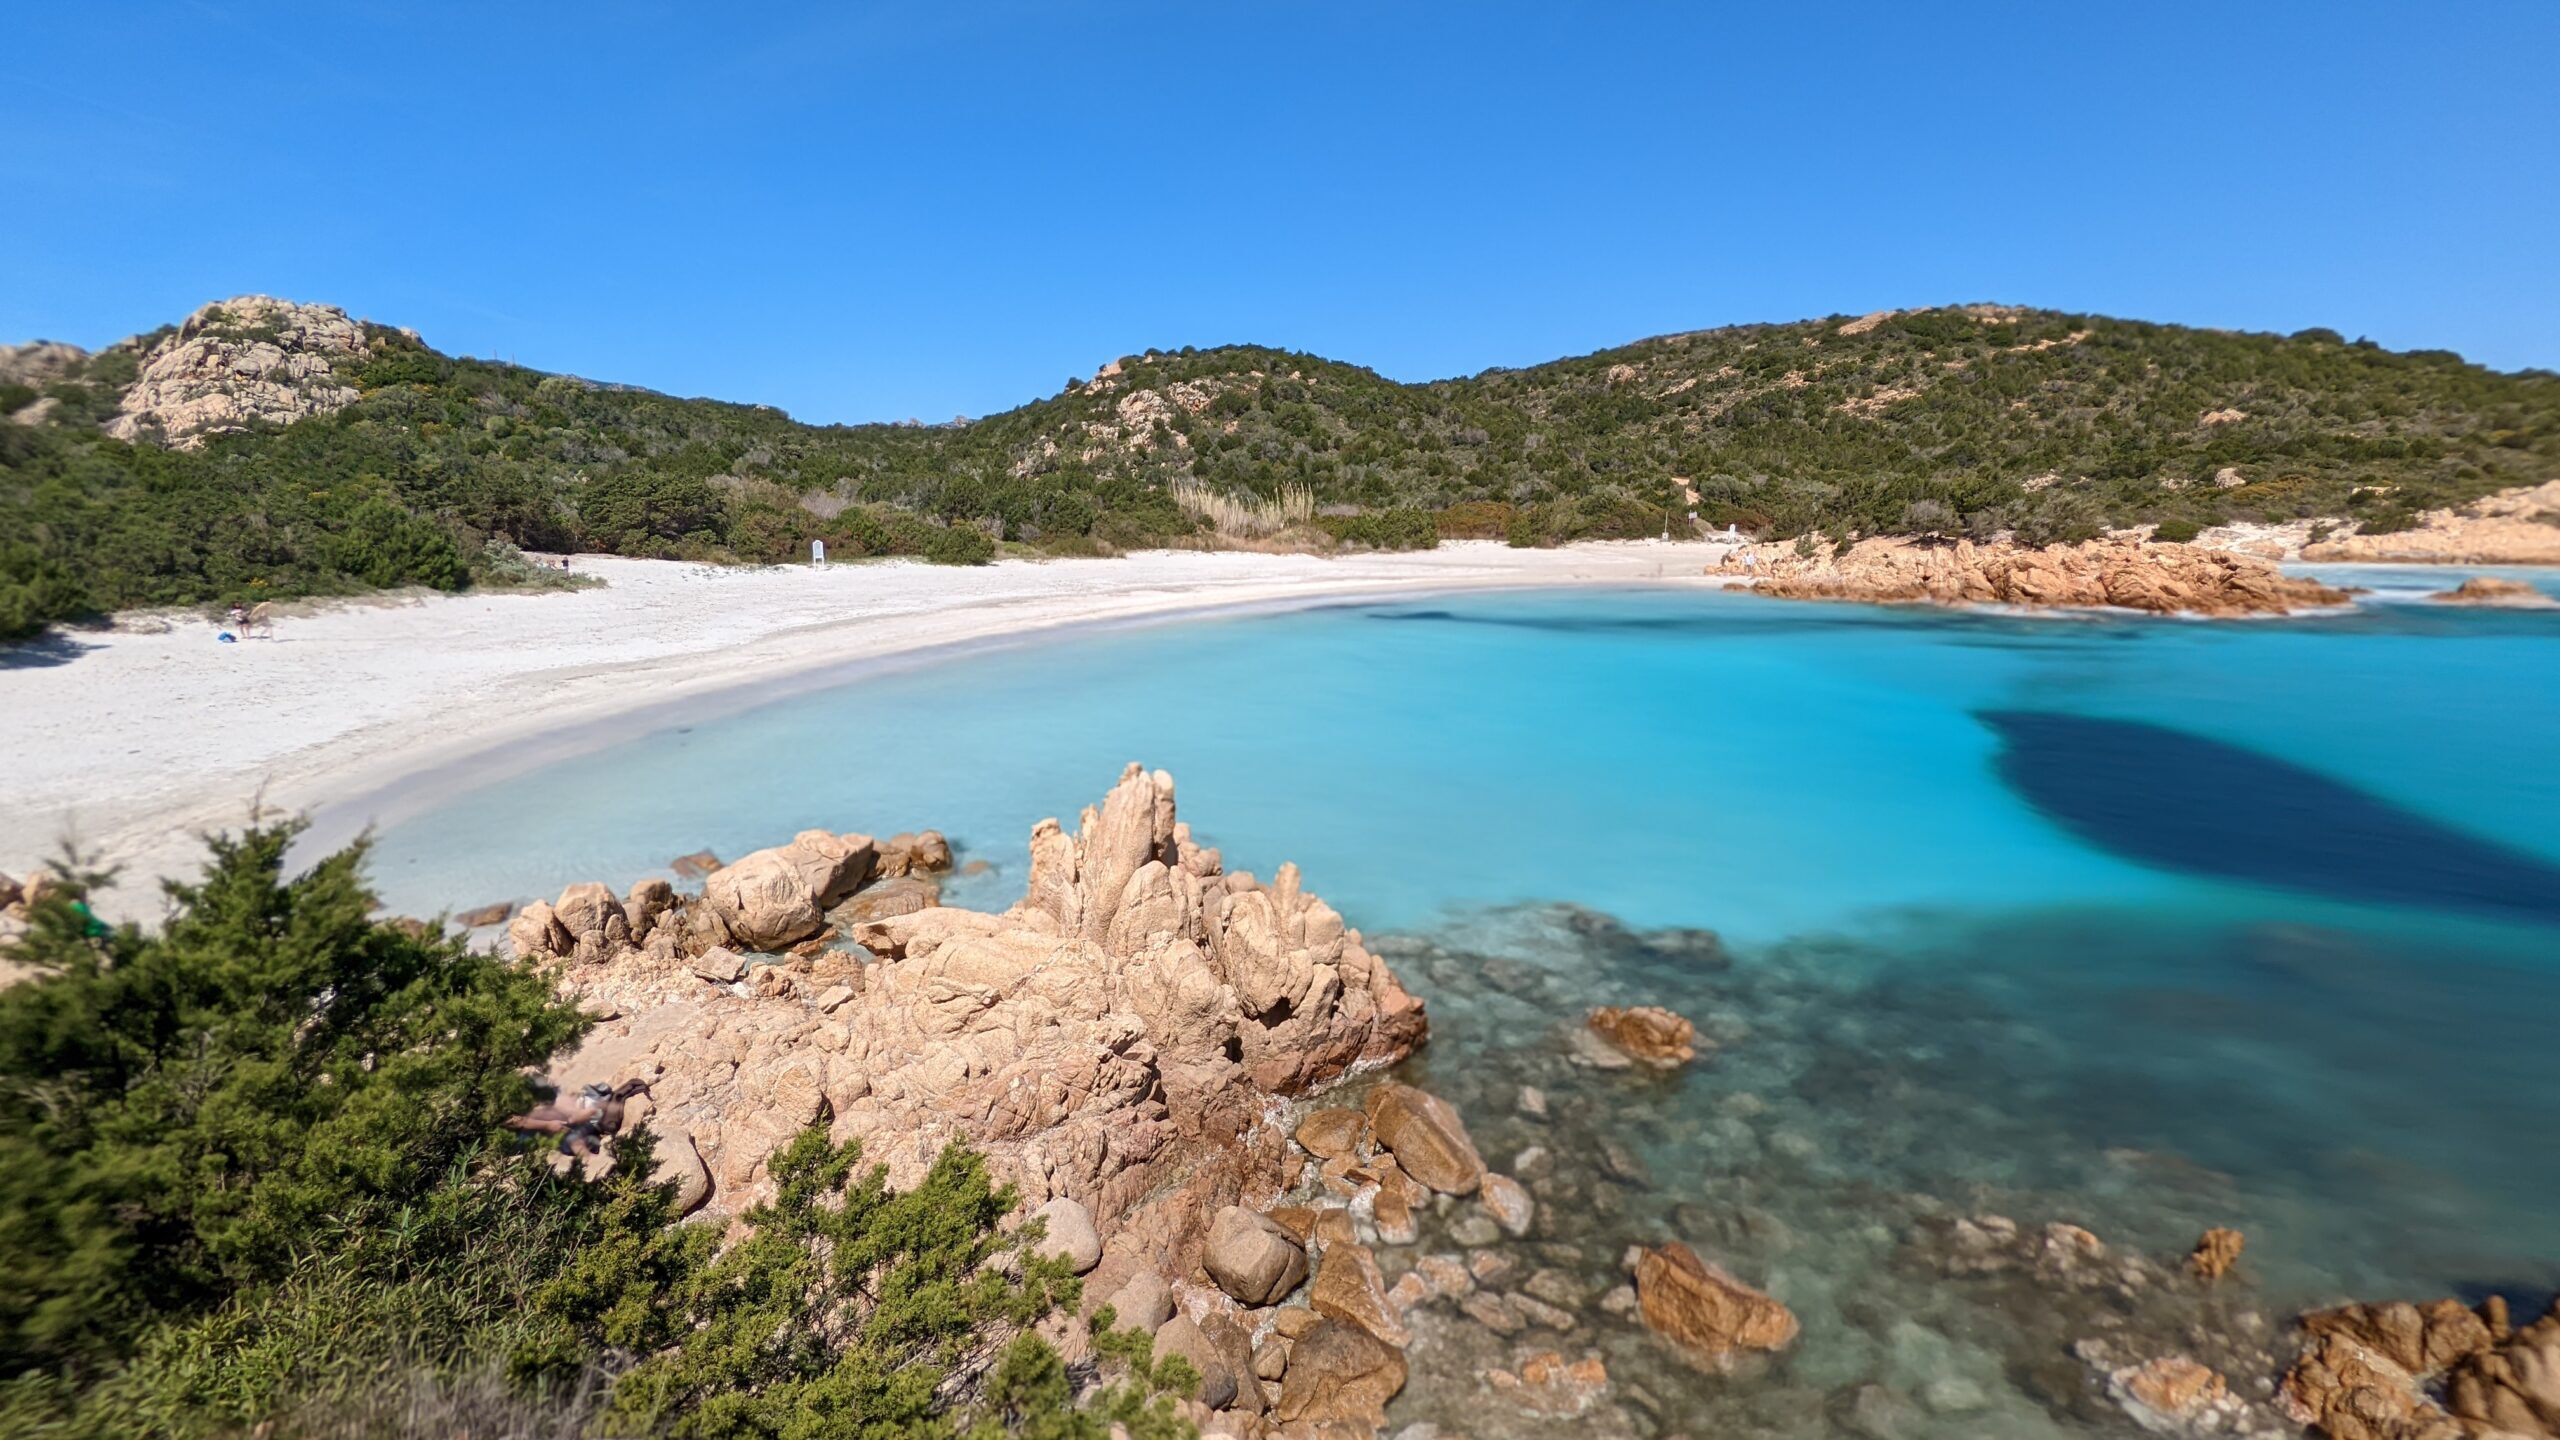 A stunning view of the beach in Sardinia